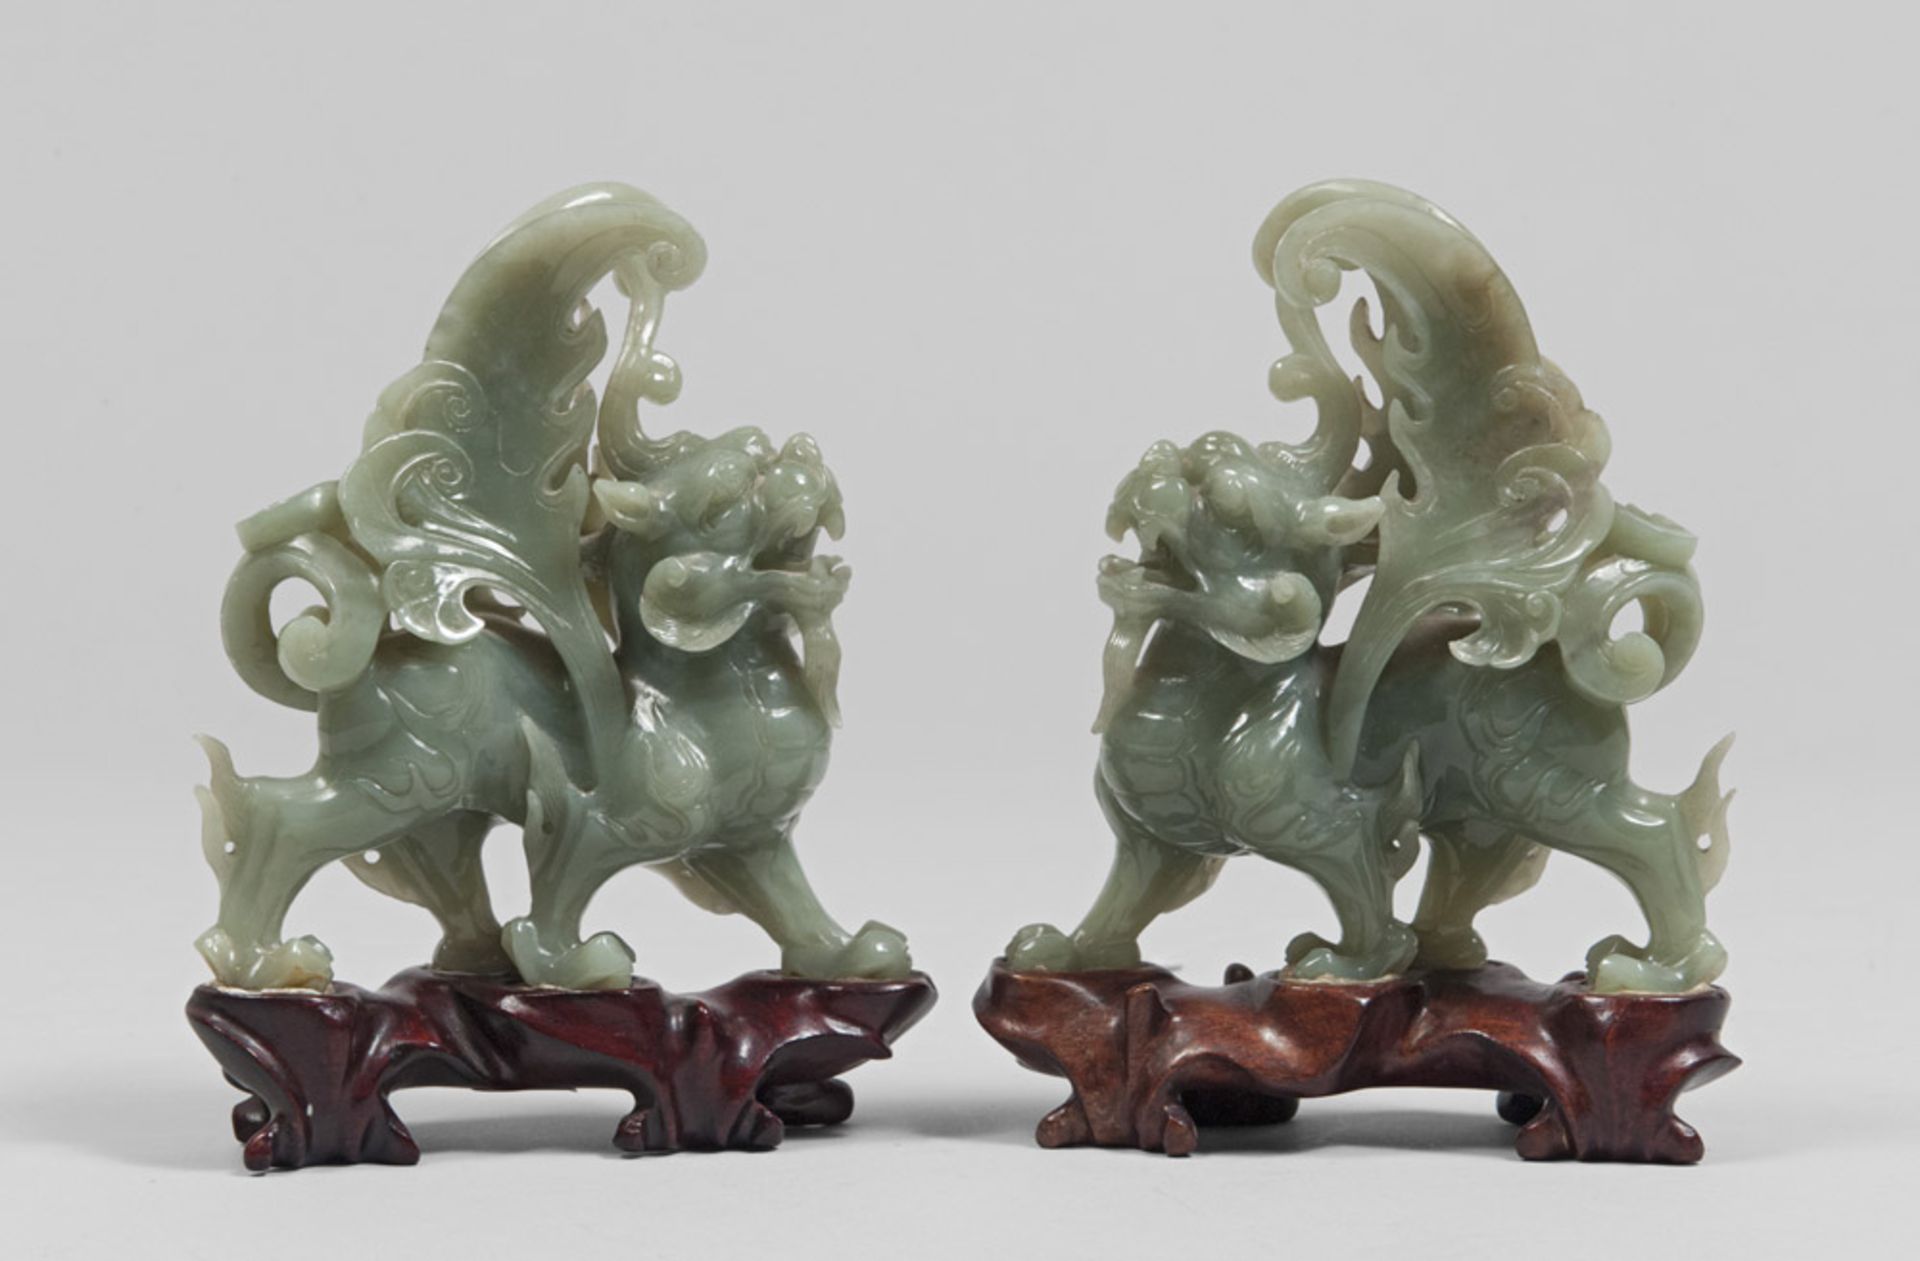 A PAIR OF CHINESE JADE SCULPTURES, 20TH CENTURY